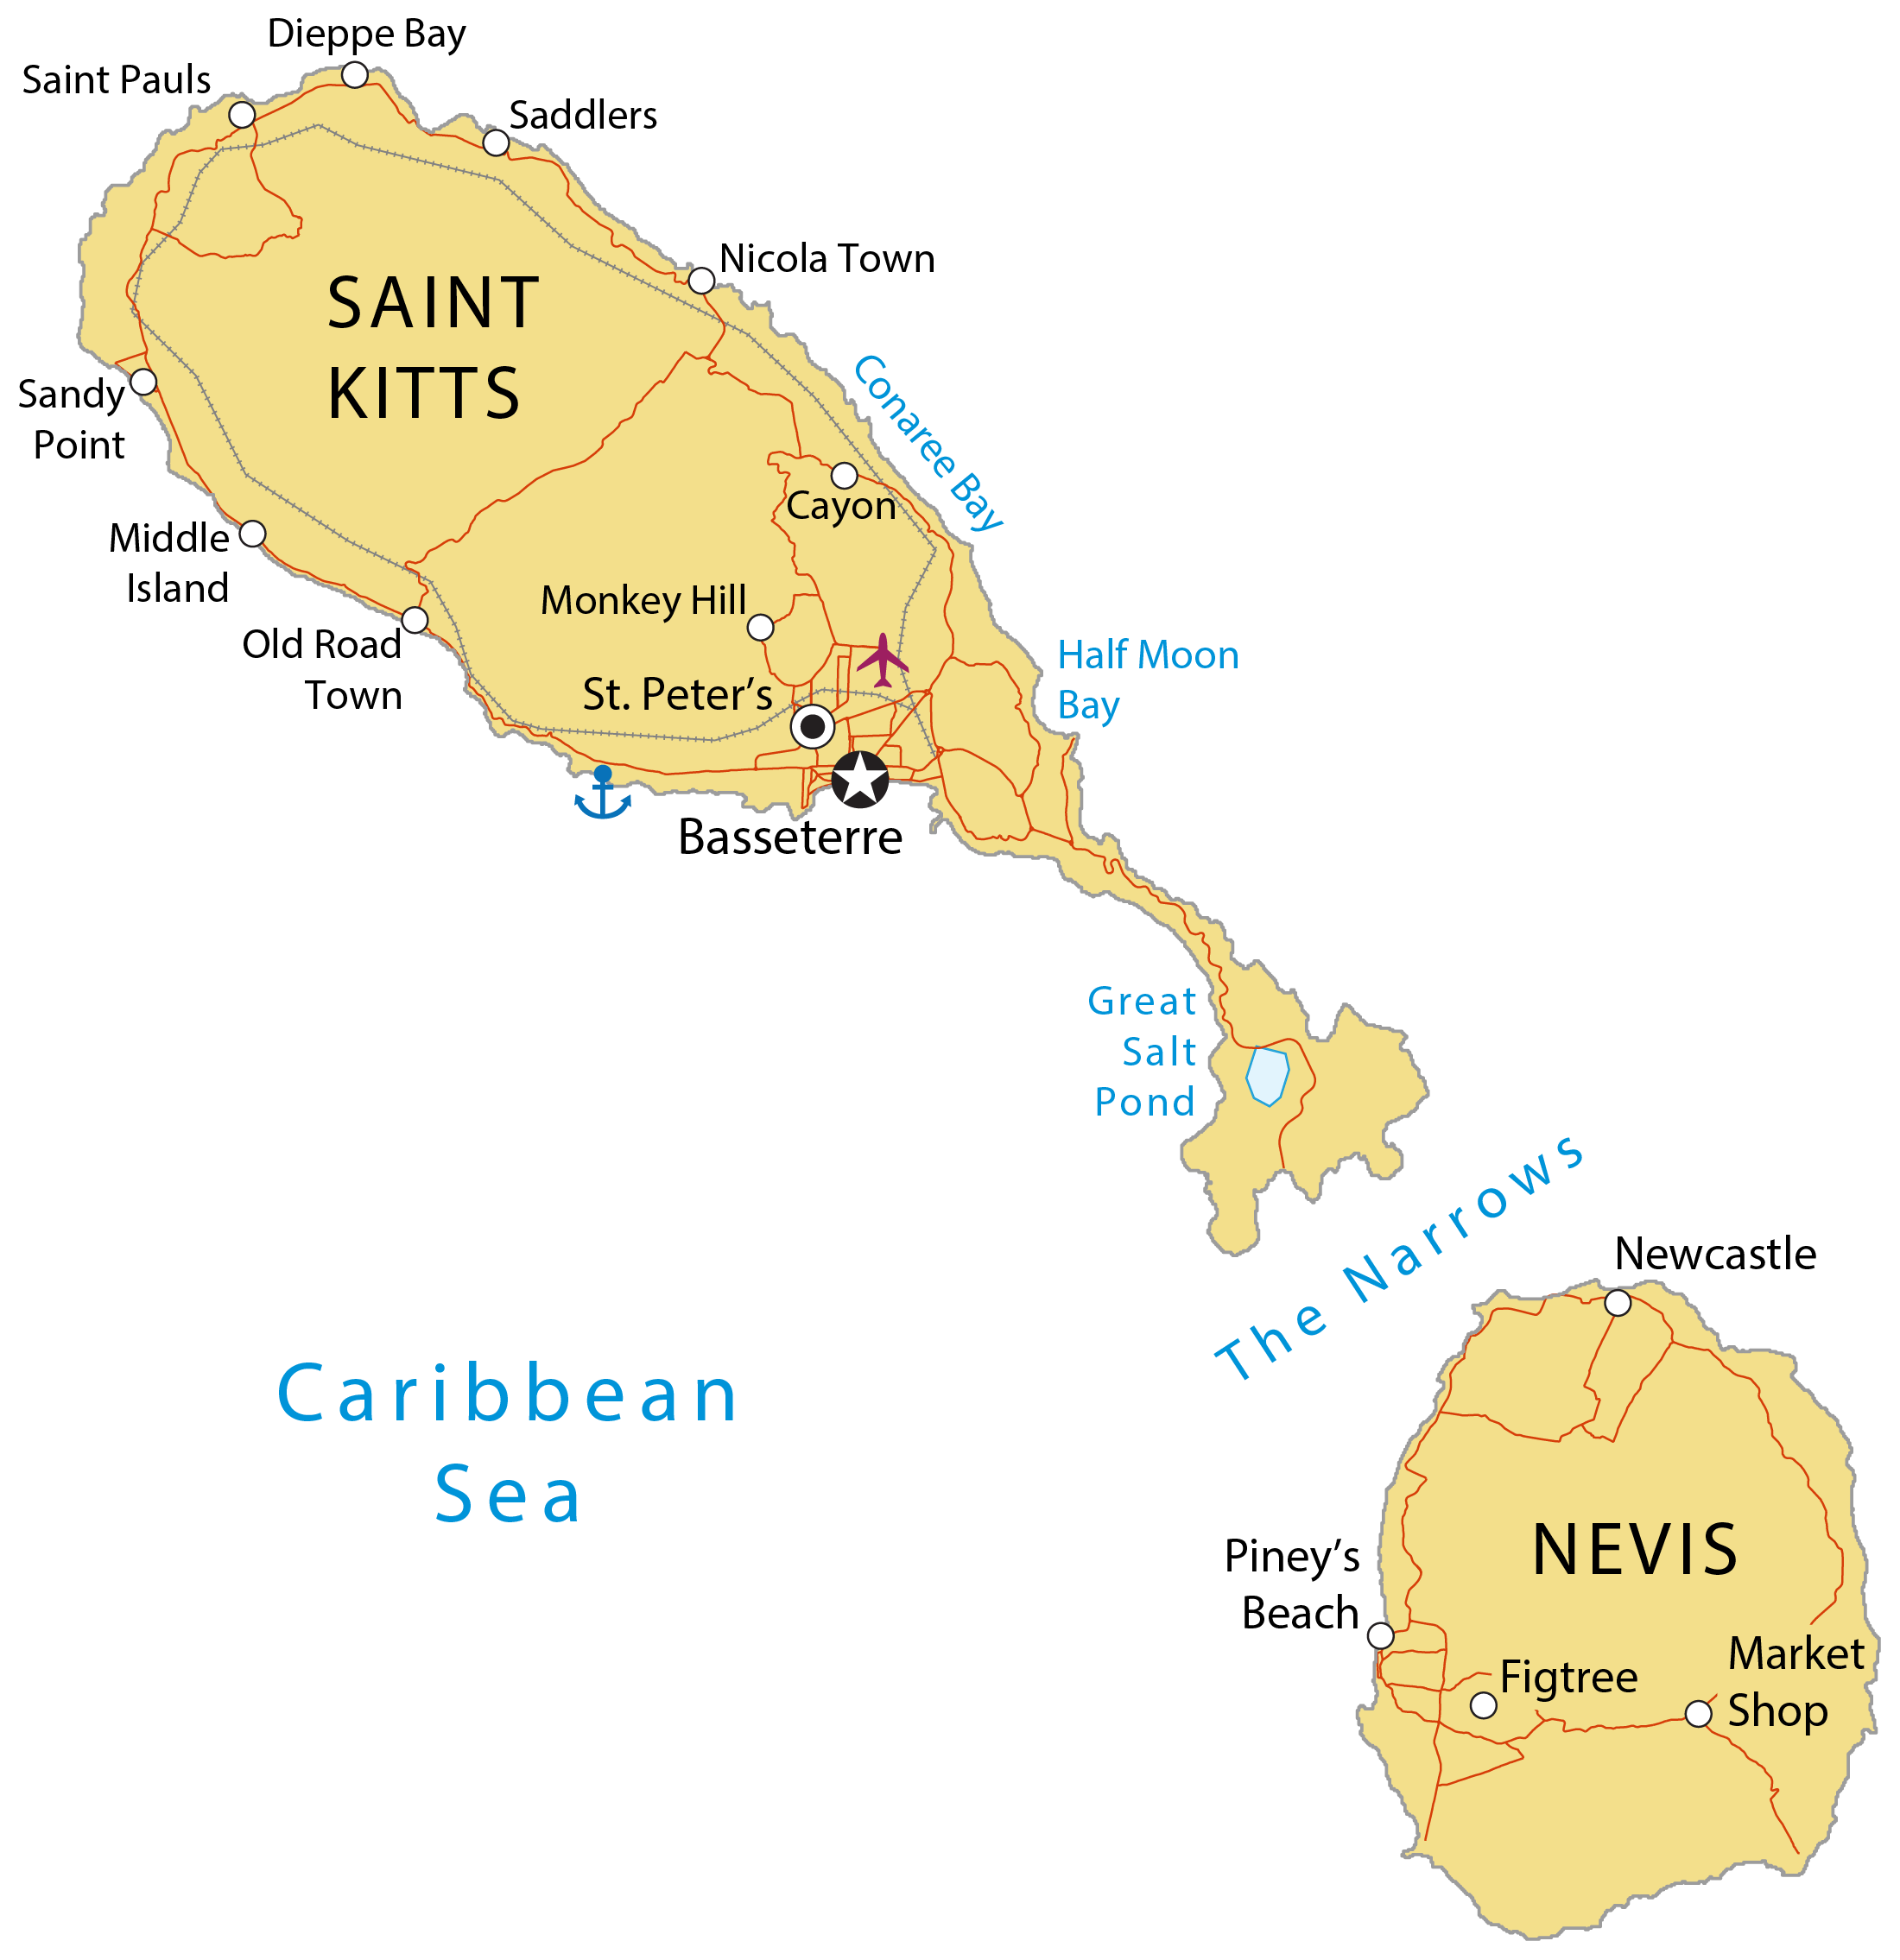 Saint Kitts and Nevis map - GIS Geography